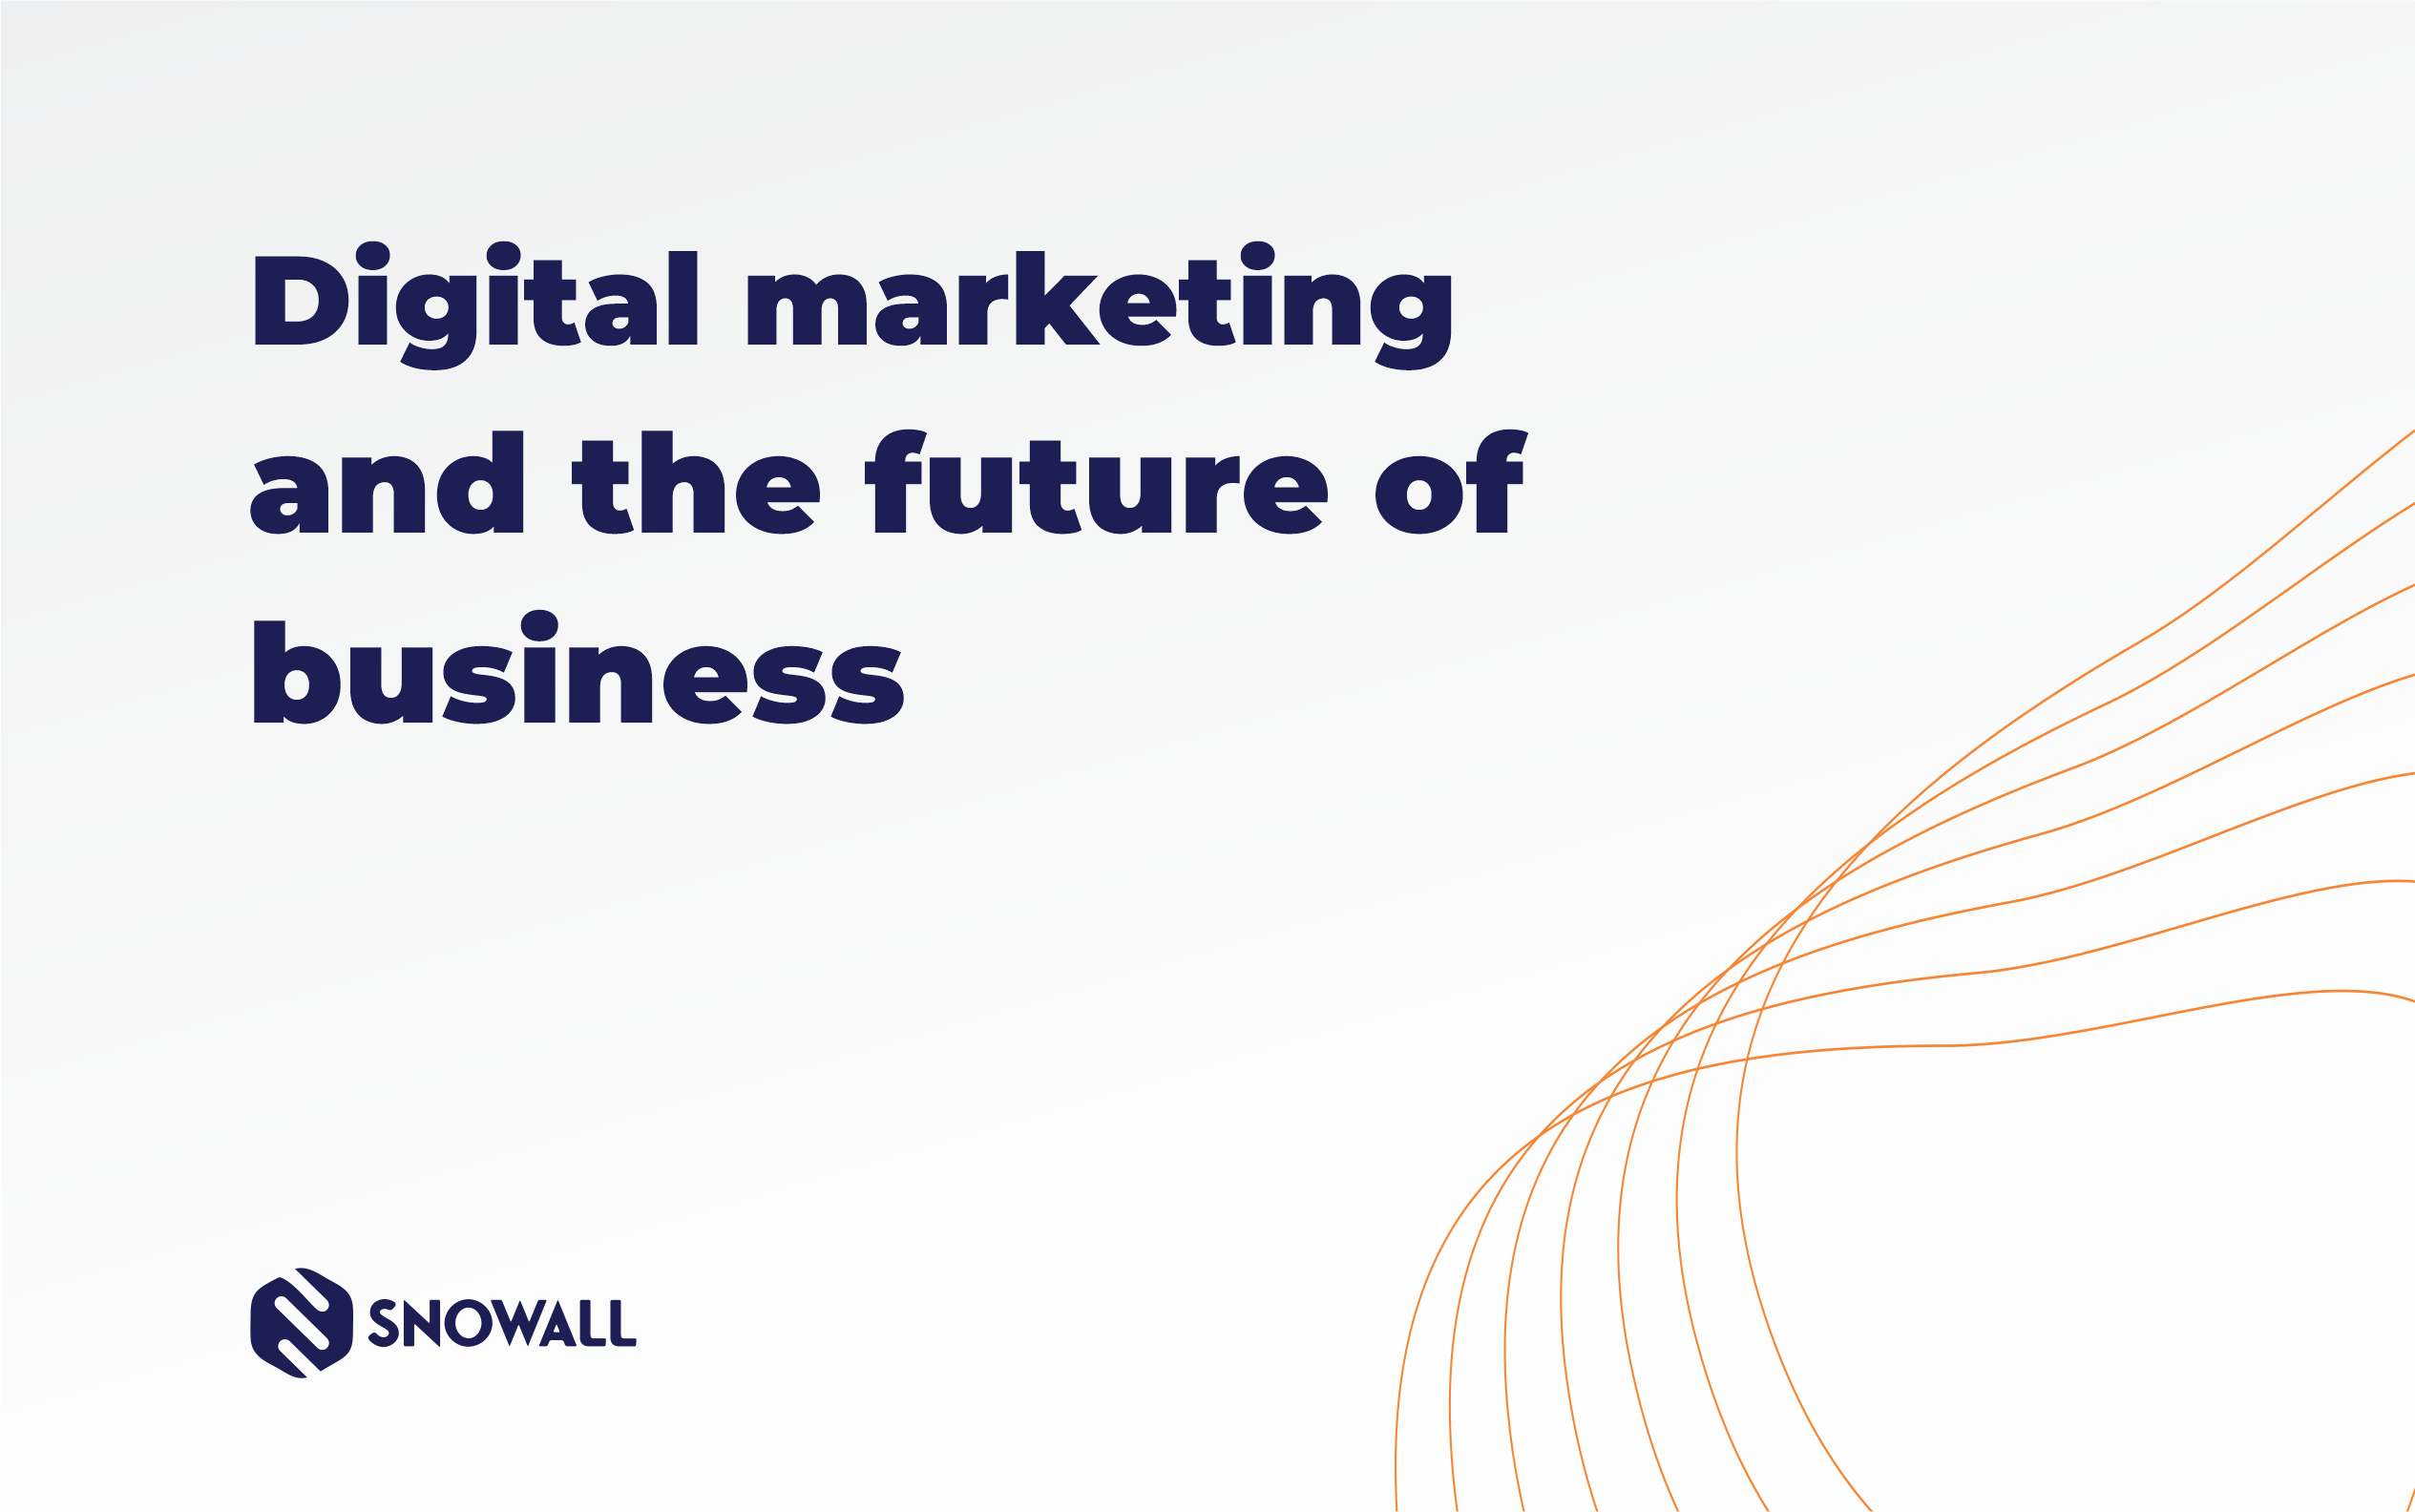 Digital marketing and the future of business